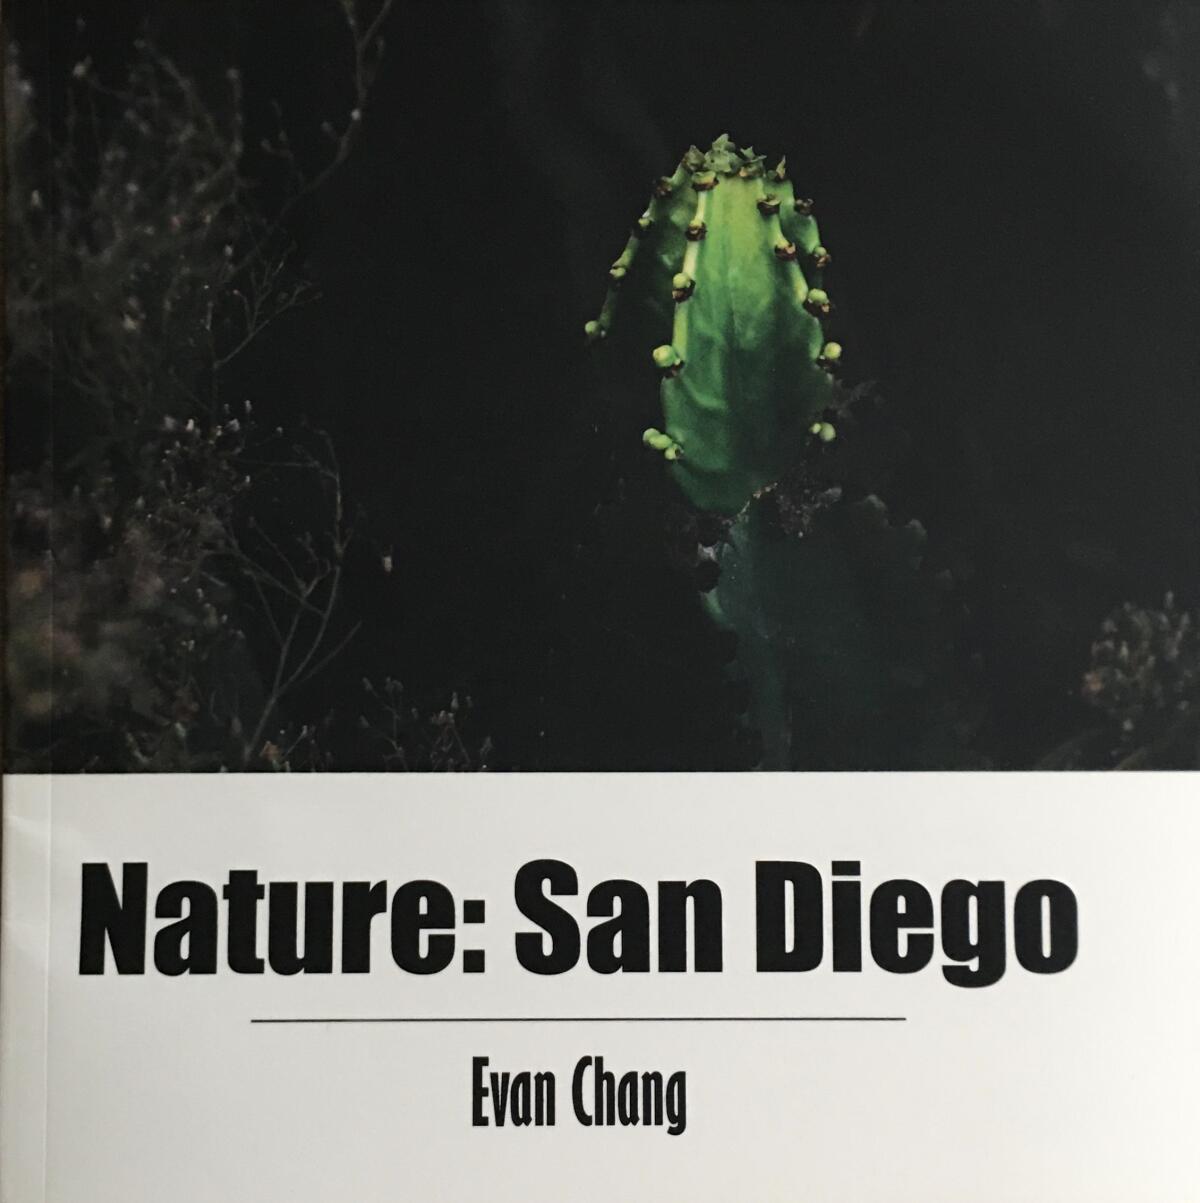 "Nature: San Diego" was released in April.